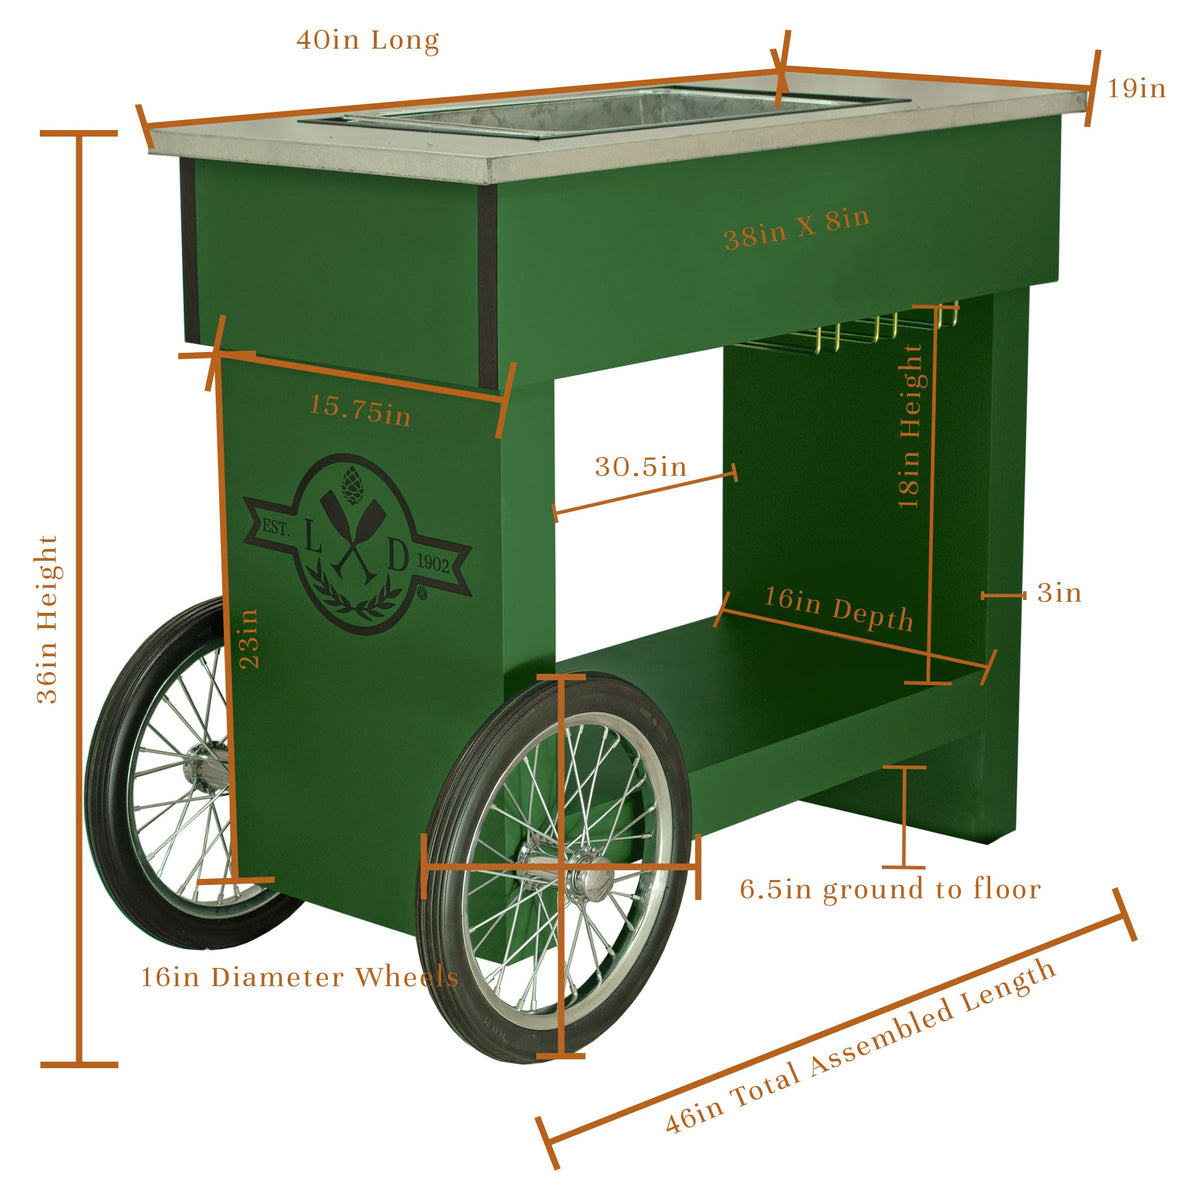 Dimensions and Specs of Lee Display's Champagne and Wine Bar Cart with Wheels in Green Color